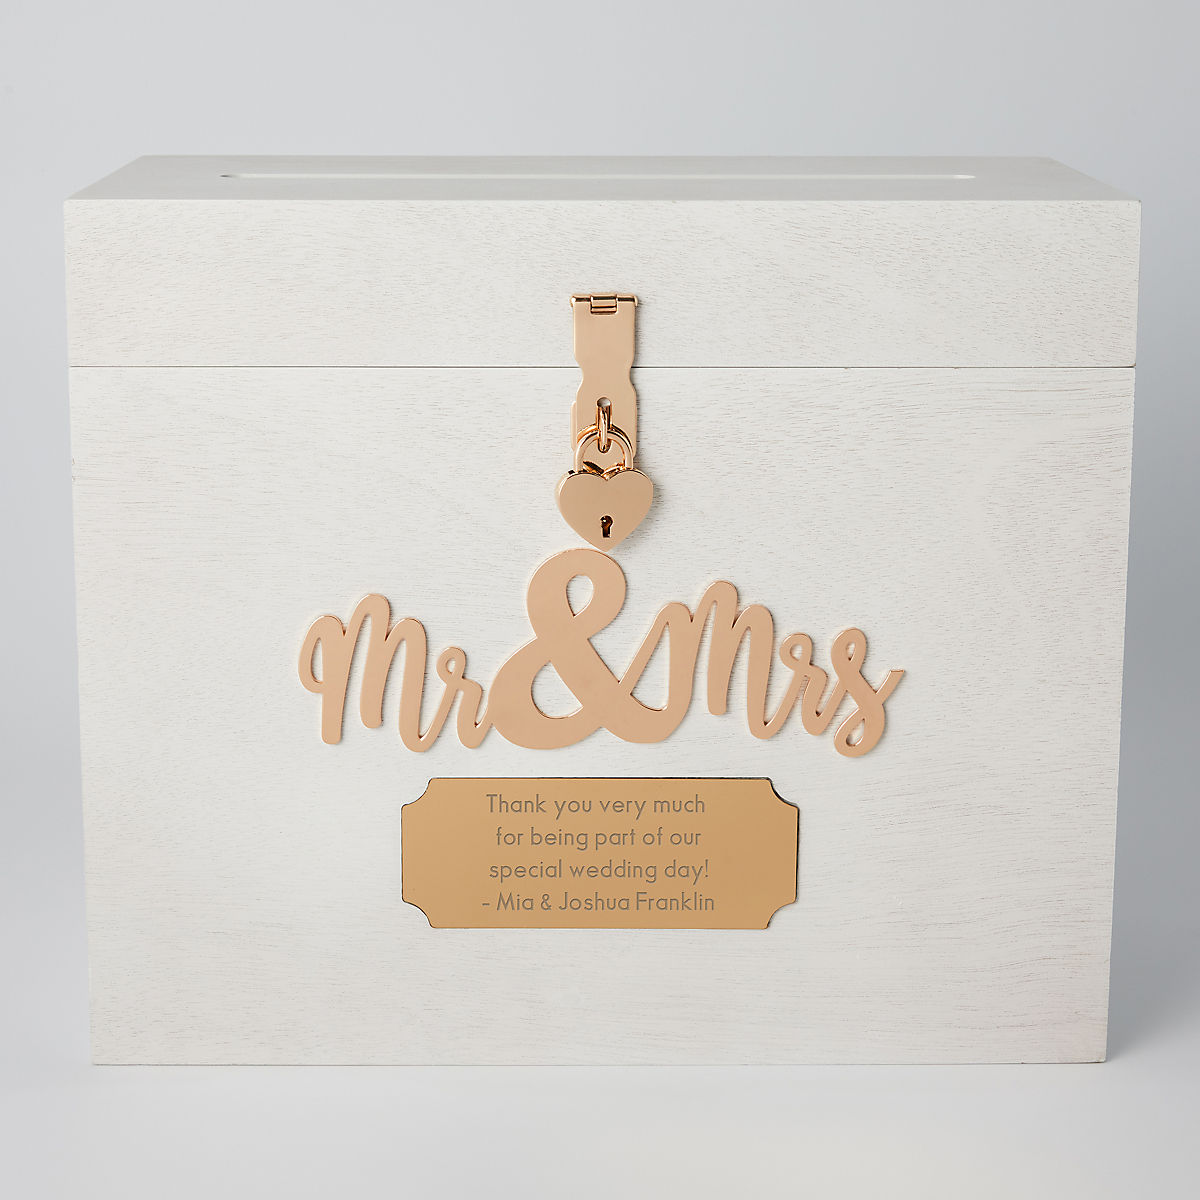 Mr and Mrs wedding day card